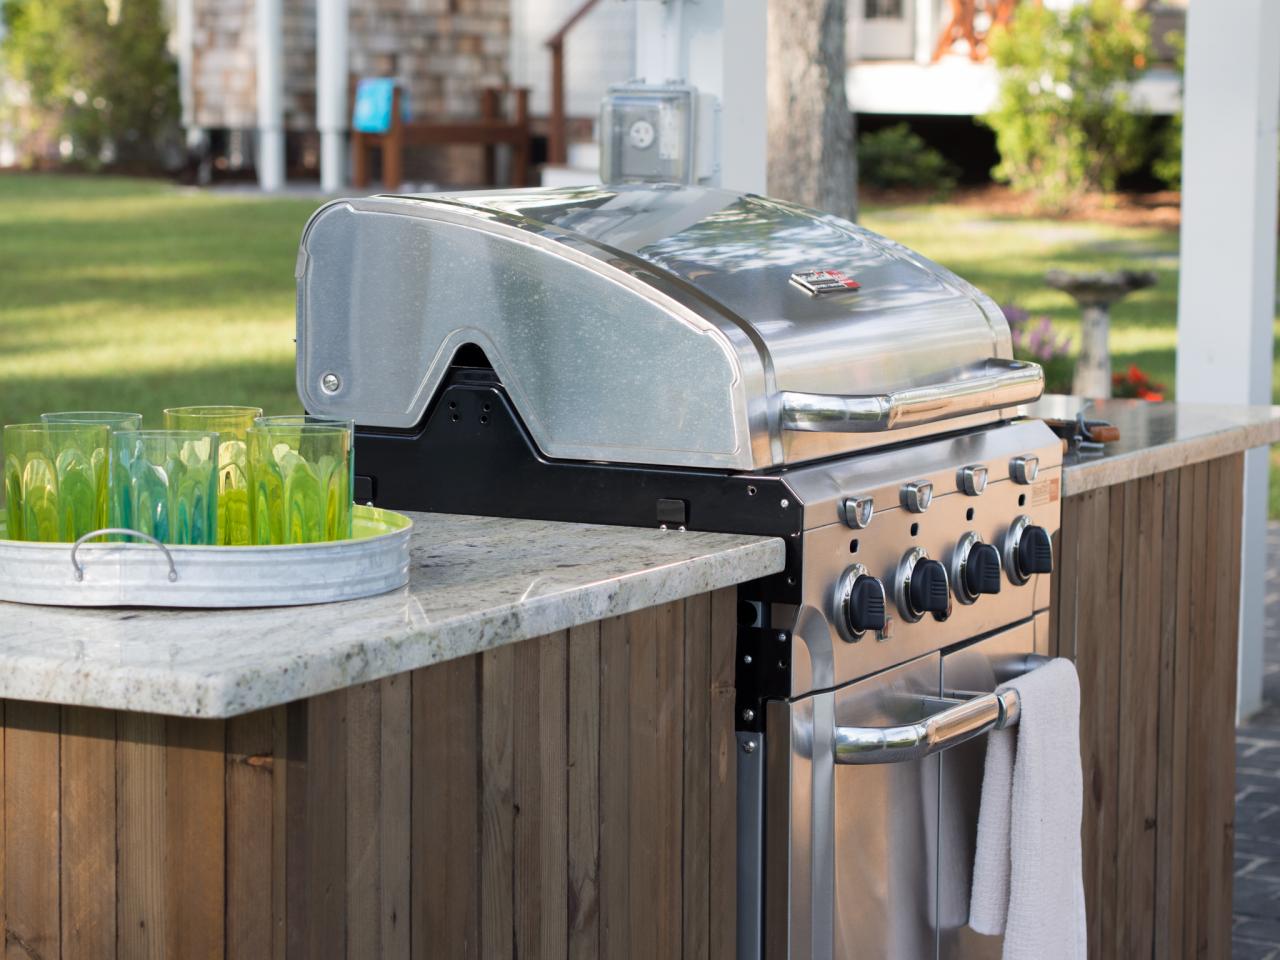 How To Build A Grilling Island, Build Gas Grill Surround